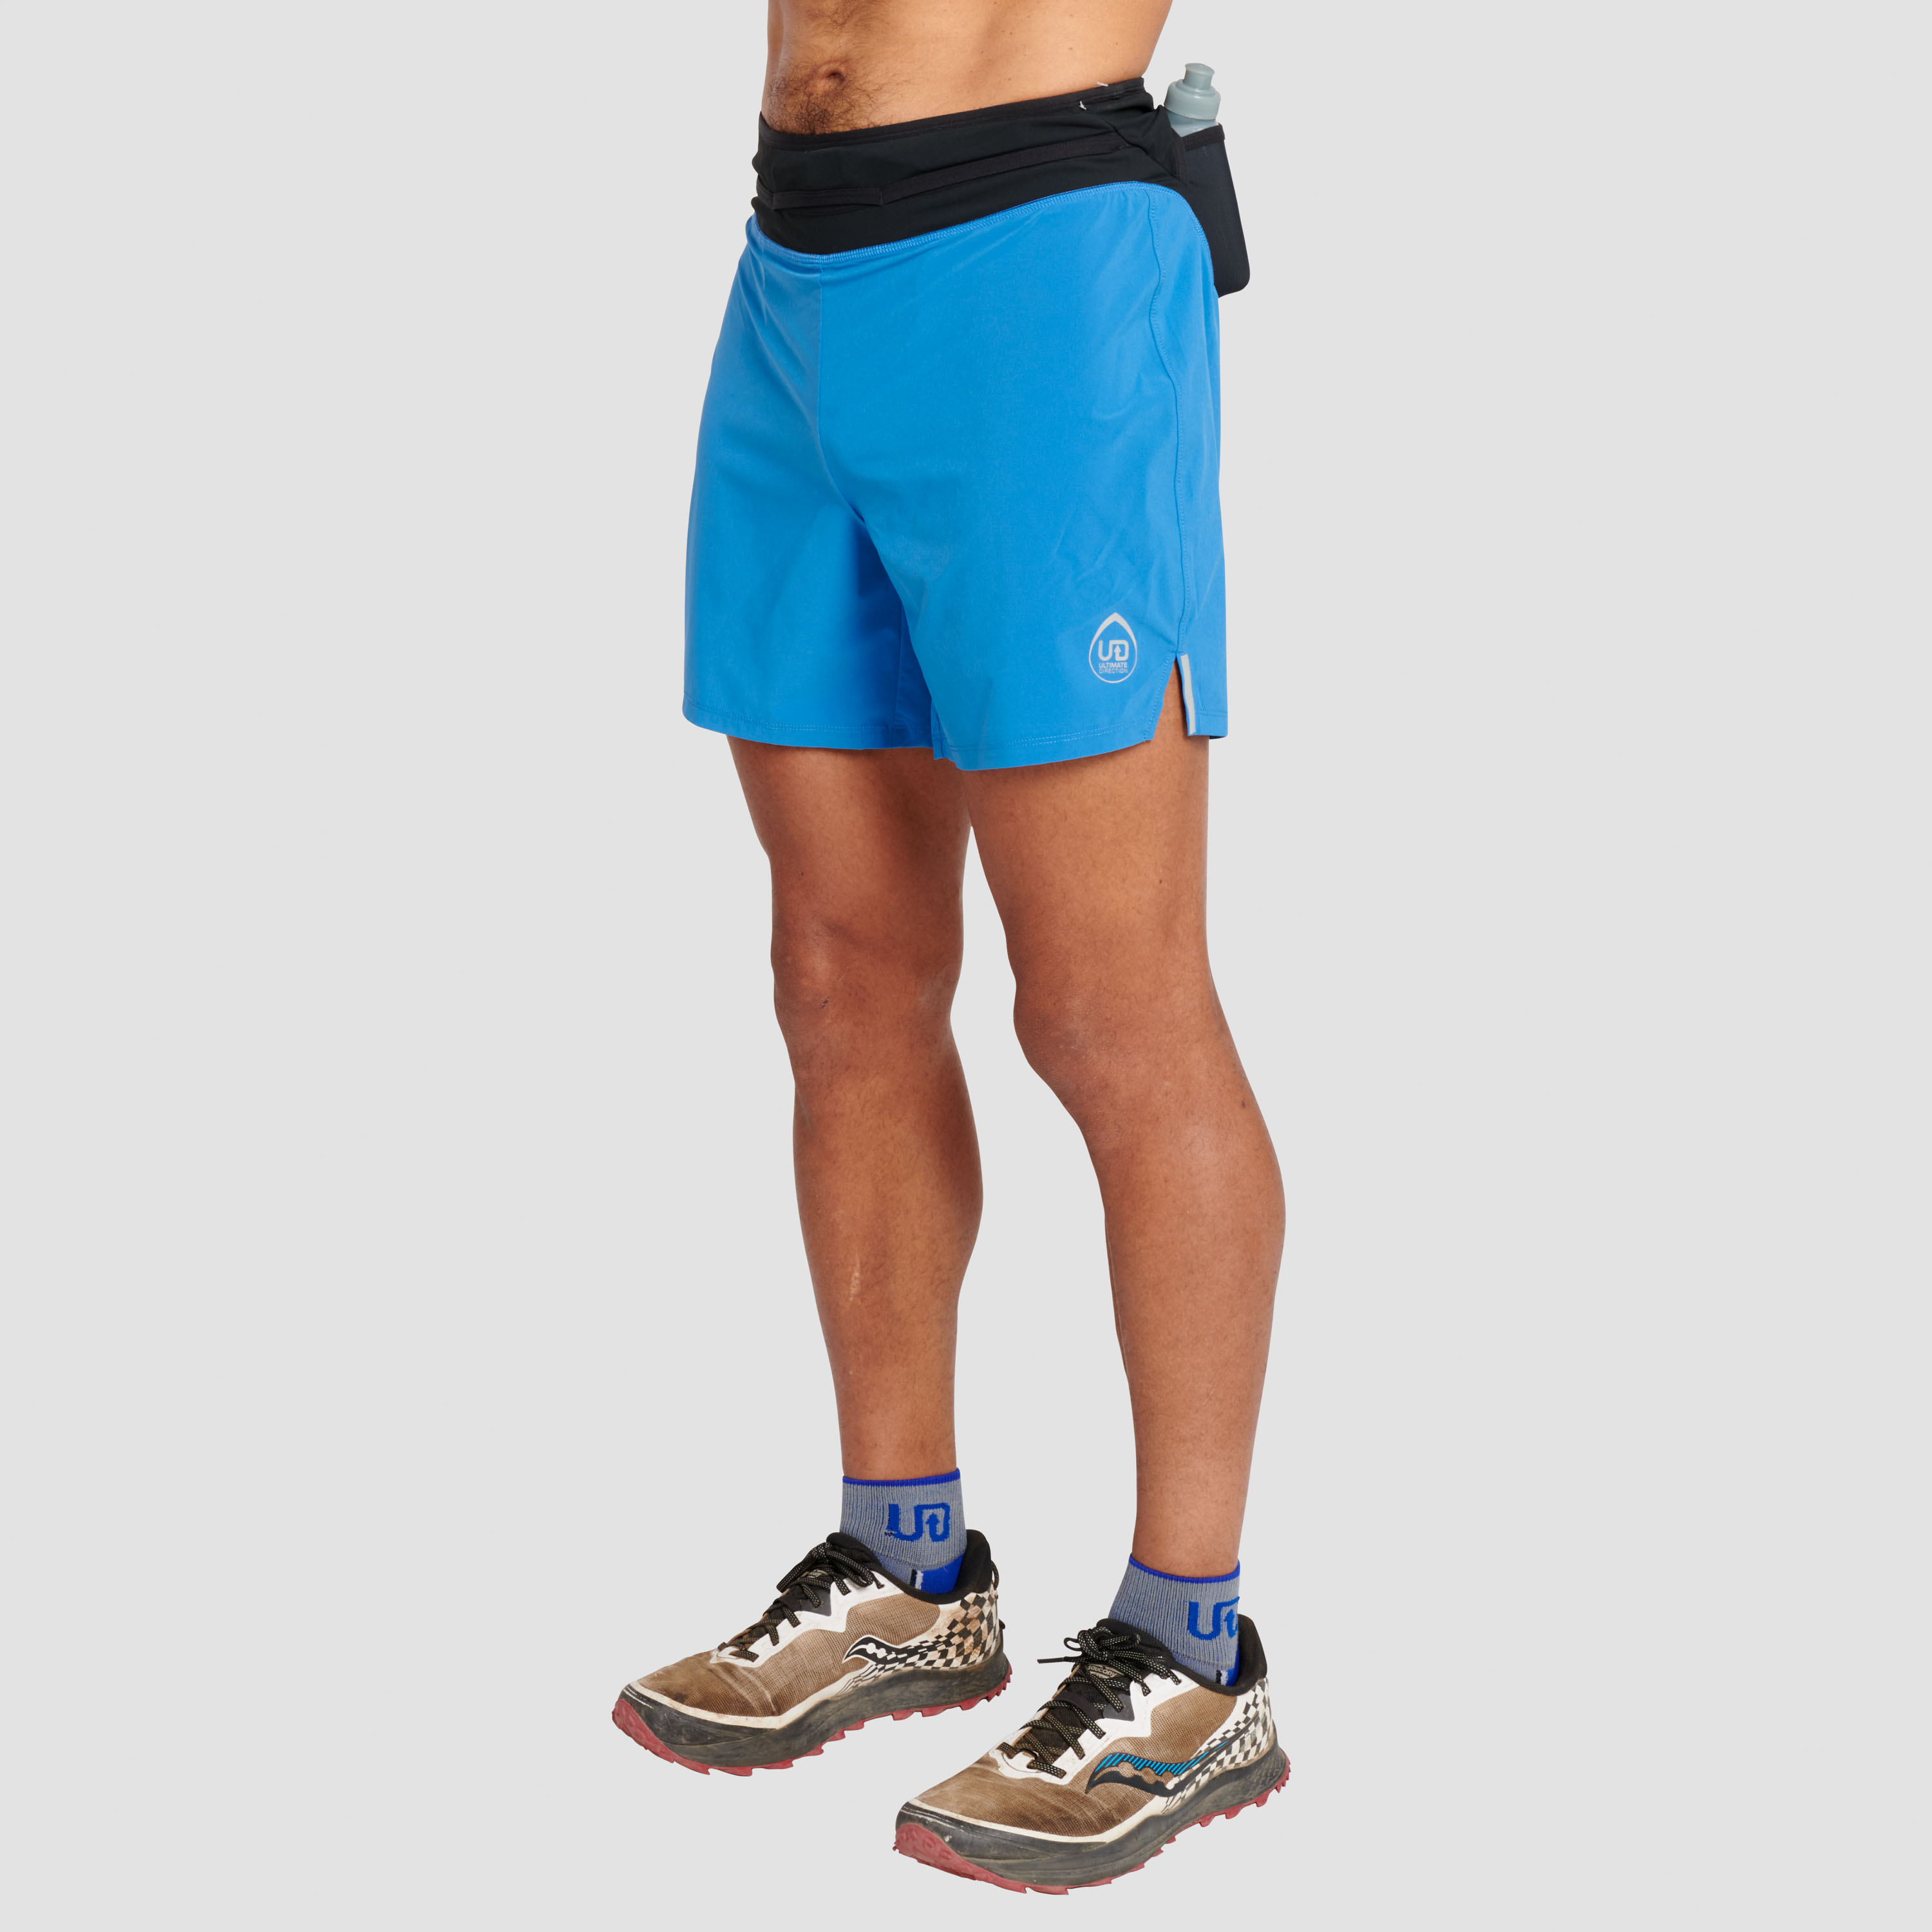 Running Shorts With a Phone Pocket: Why They're So Convenient. Nike IN